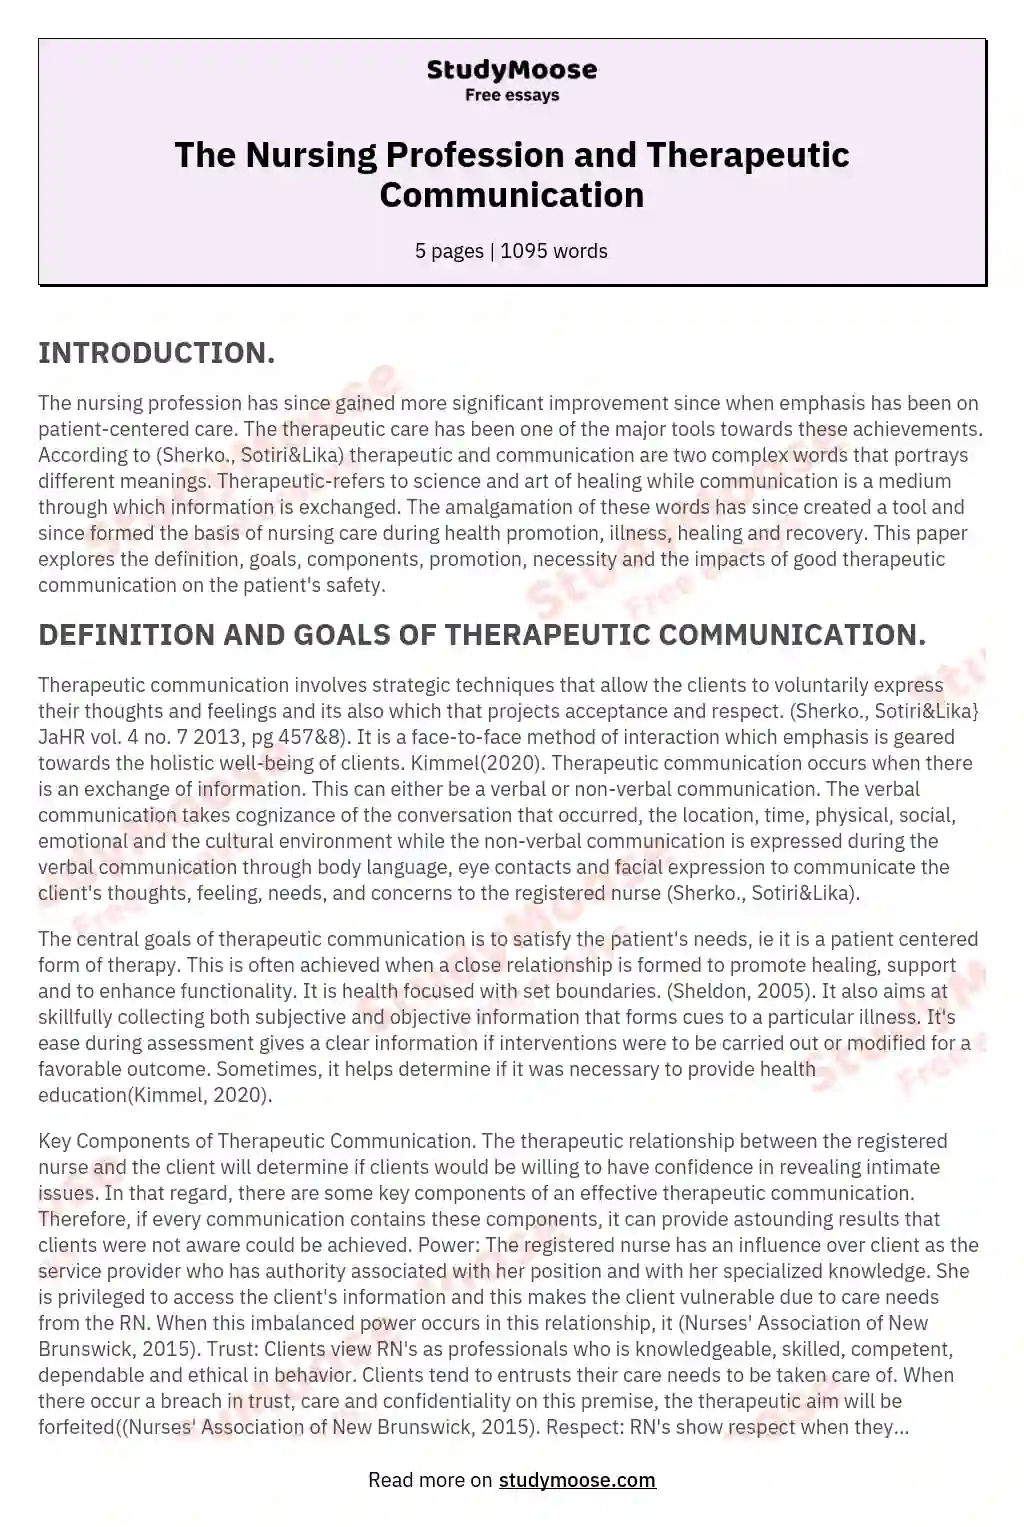 The Nursing Profession and Therapeutic Communication